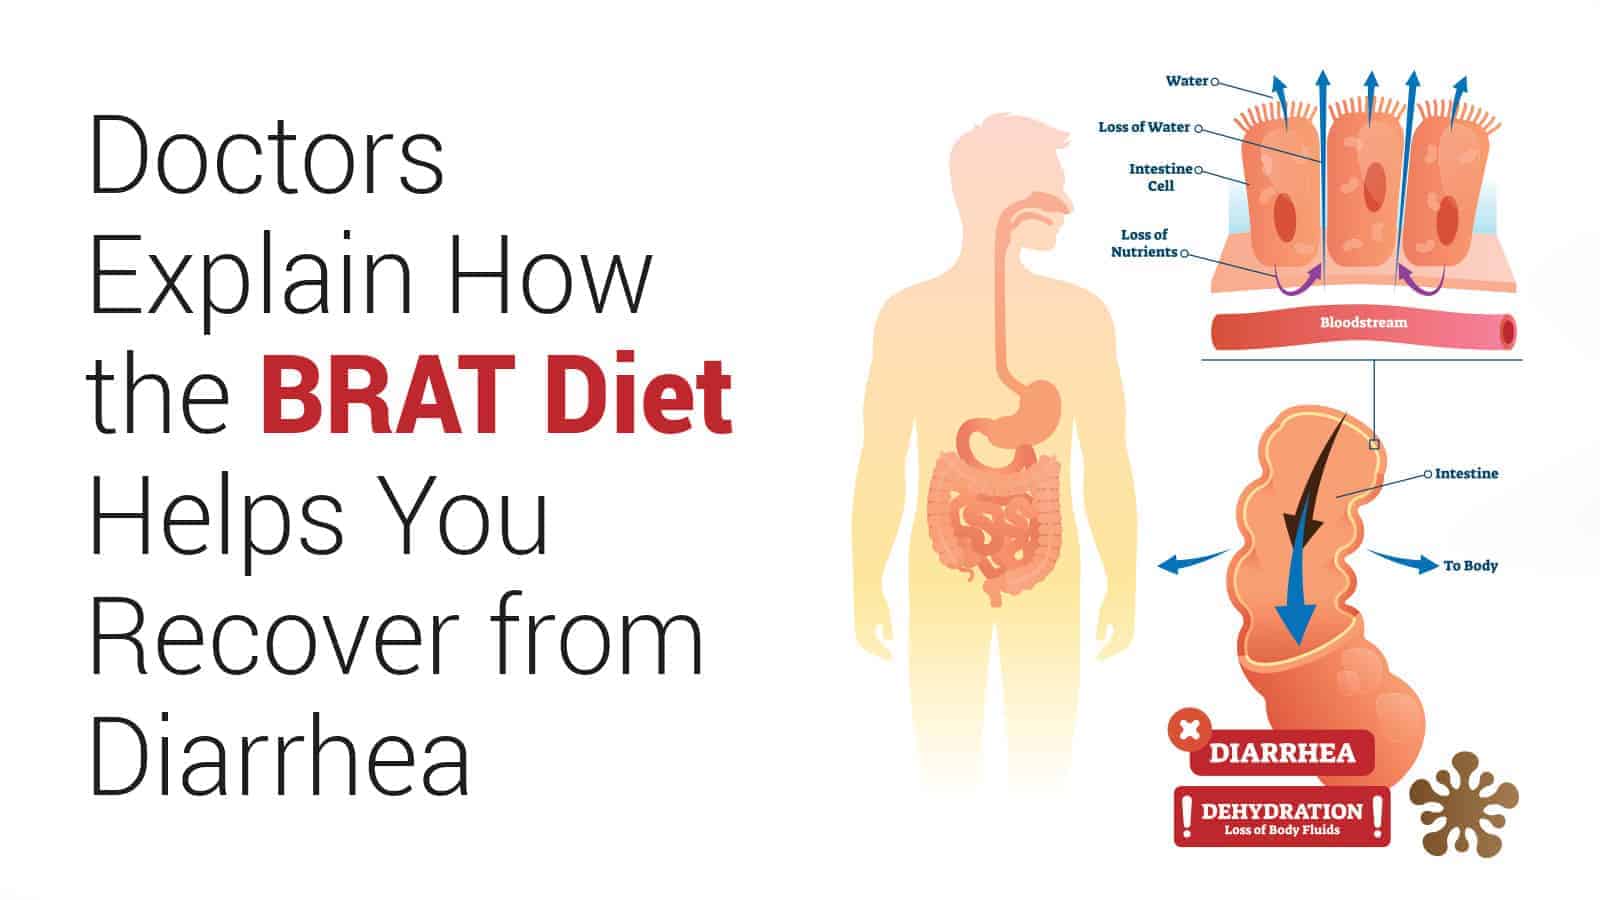 Doctors Explain How the BRAT Diet Helps You Recover from Diarrhea 